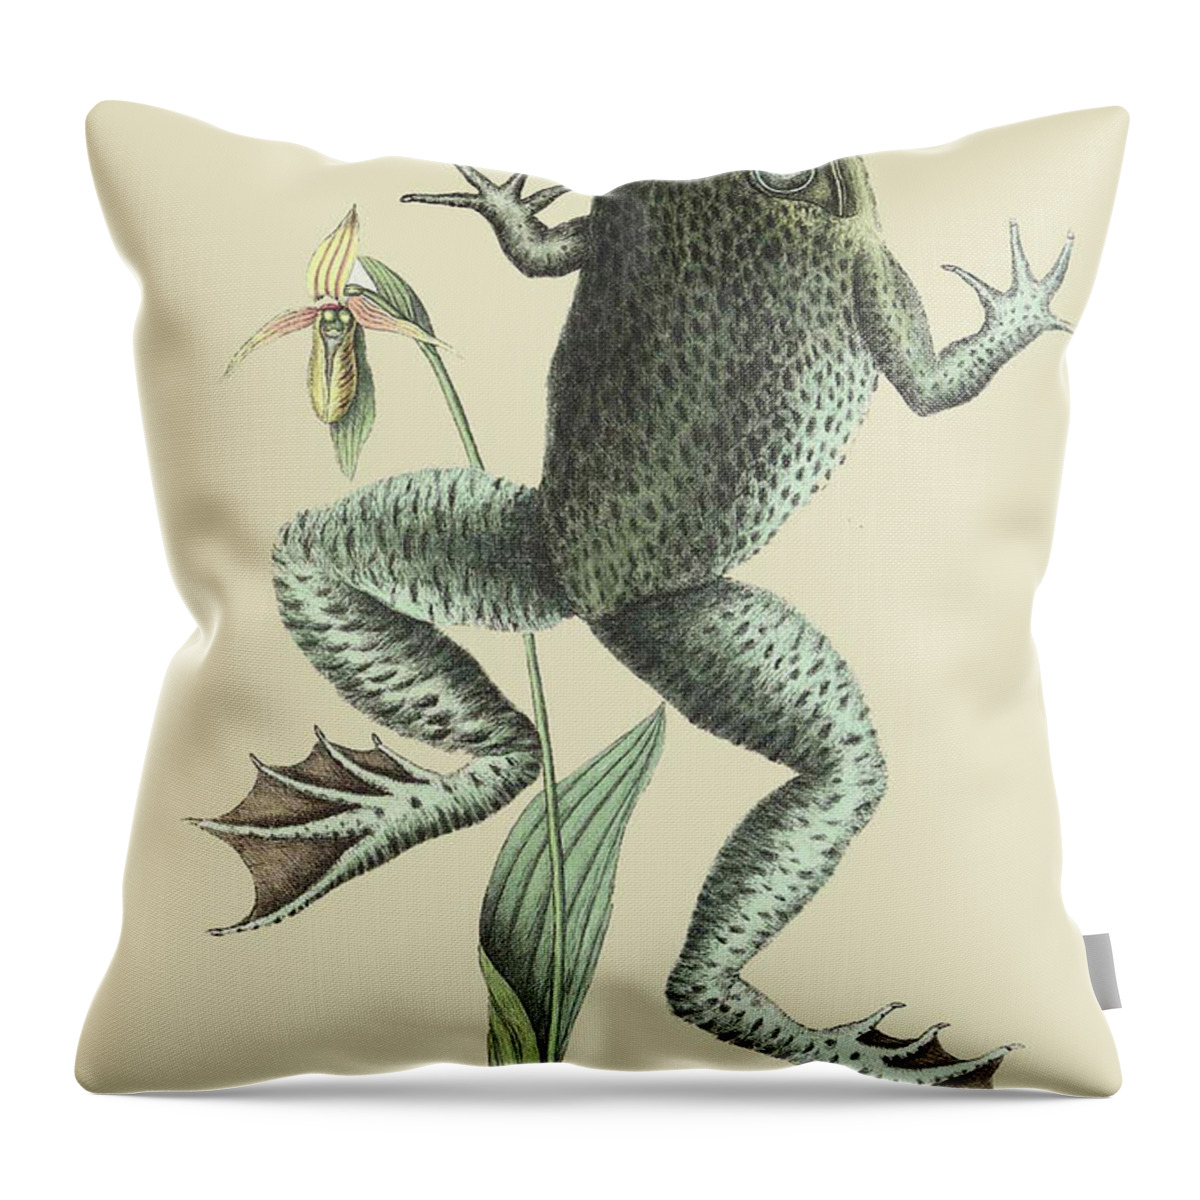 Nature Throw Pillow featuring the painting Bull Frog by Mark Catesby